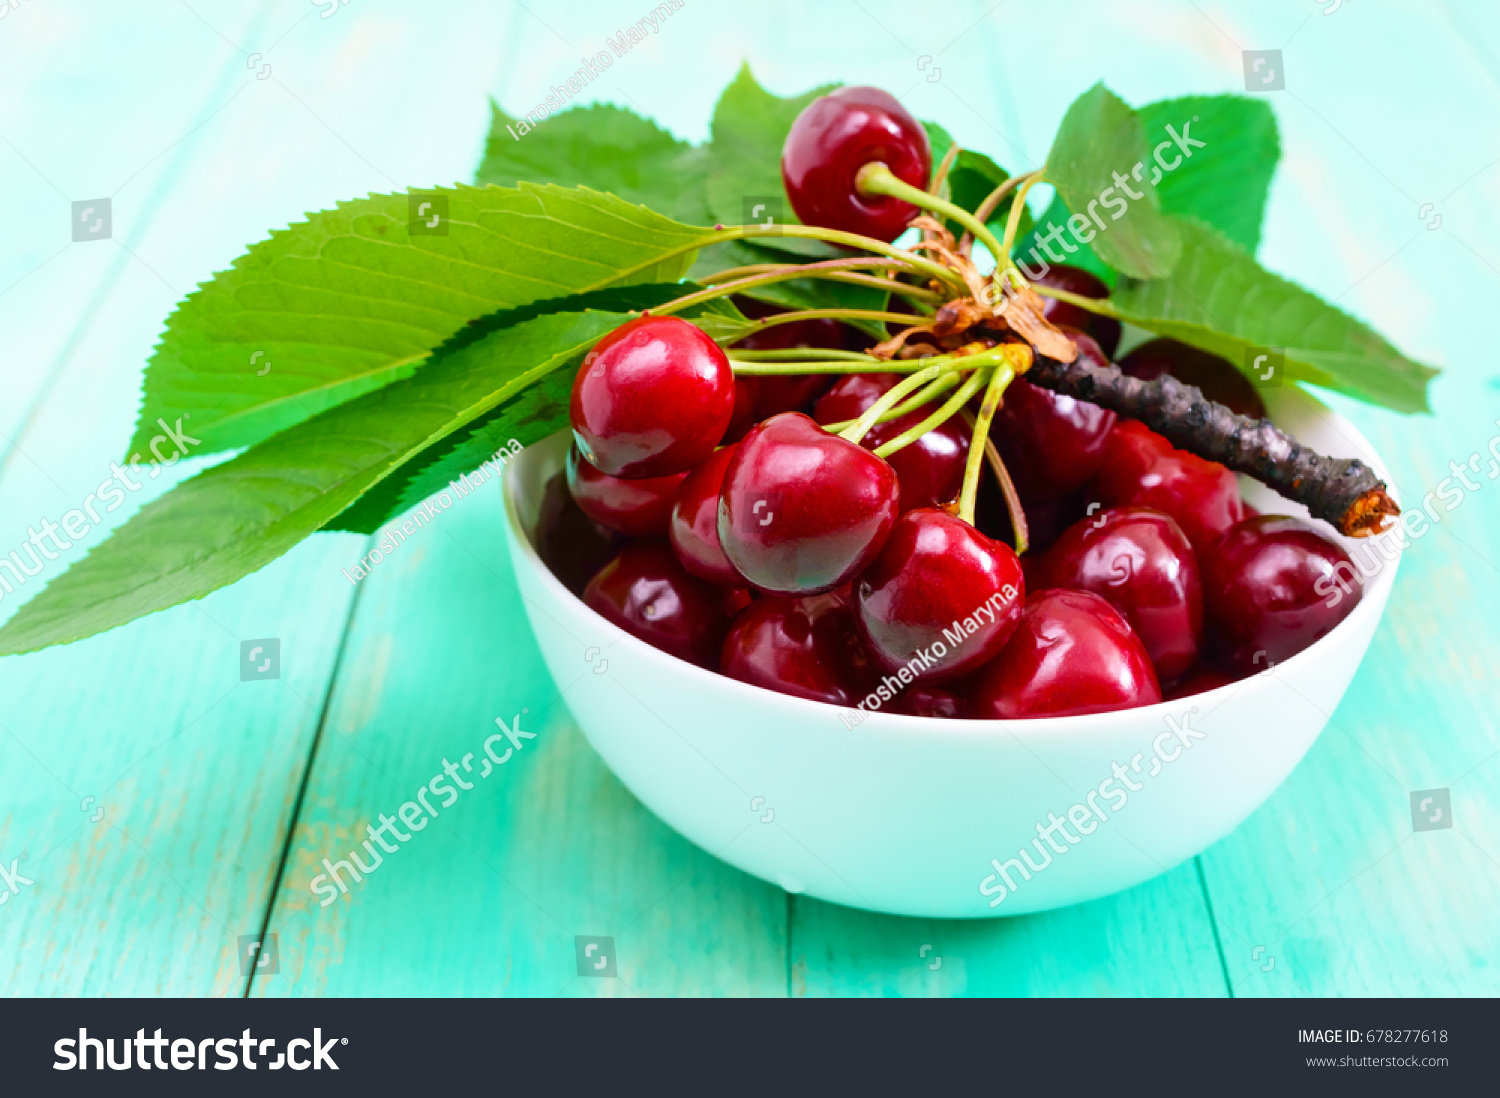 Ripe juicy red cherries in a ceramic bowl on a bright wooden background #678277618